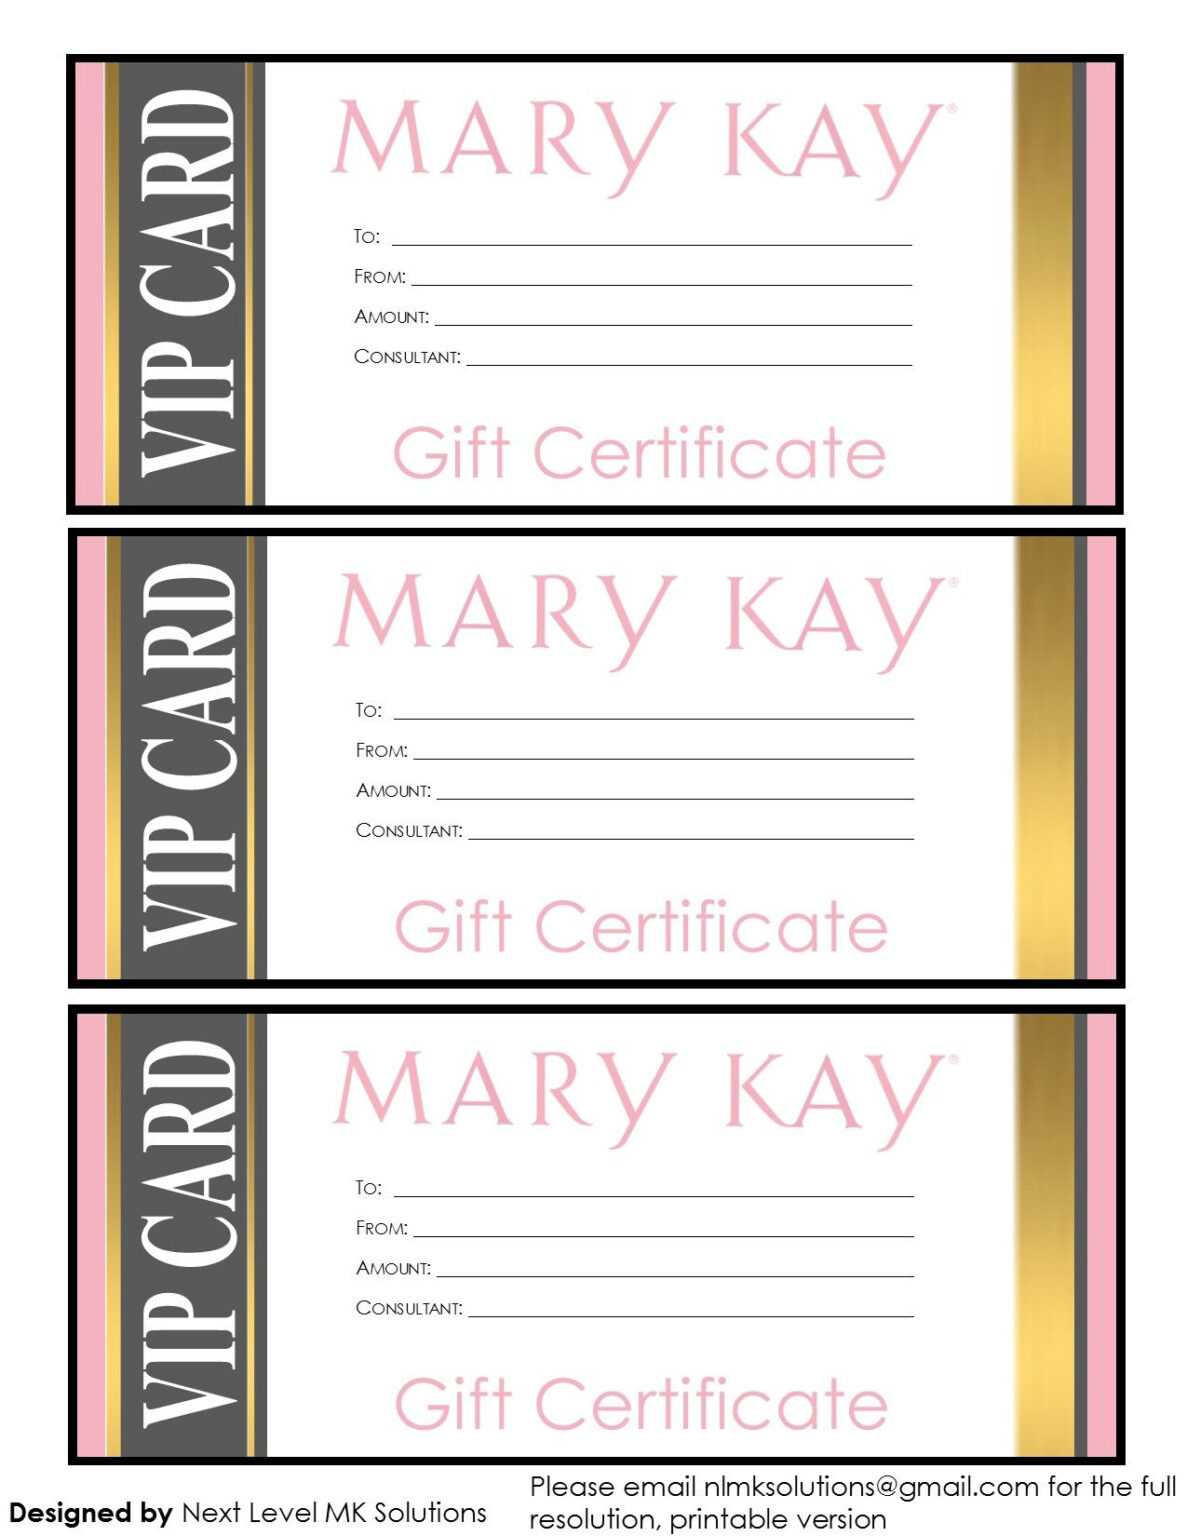 mary-kay-gift-certificate-template